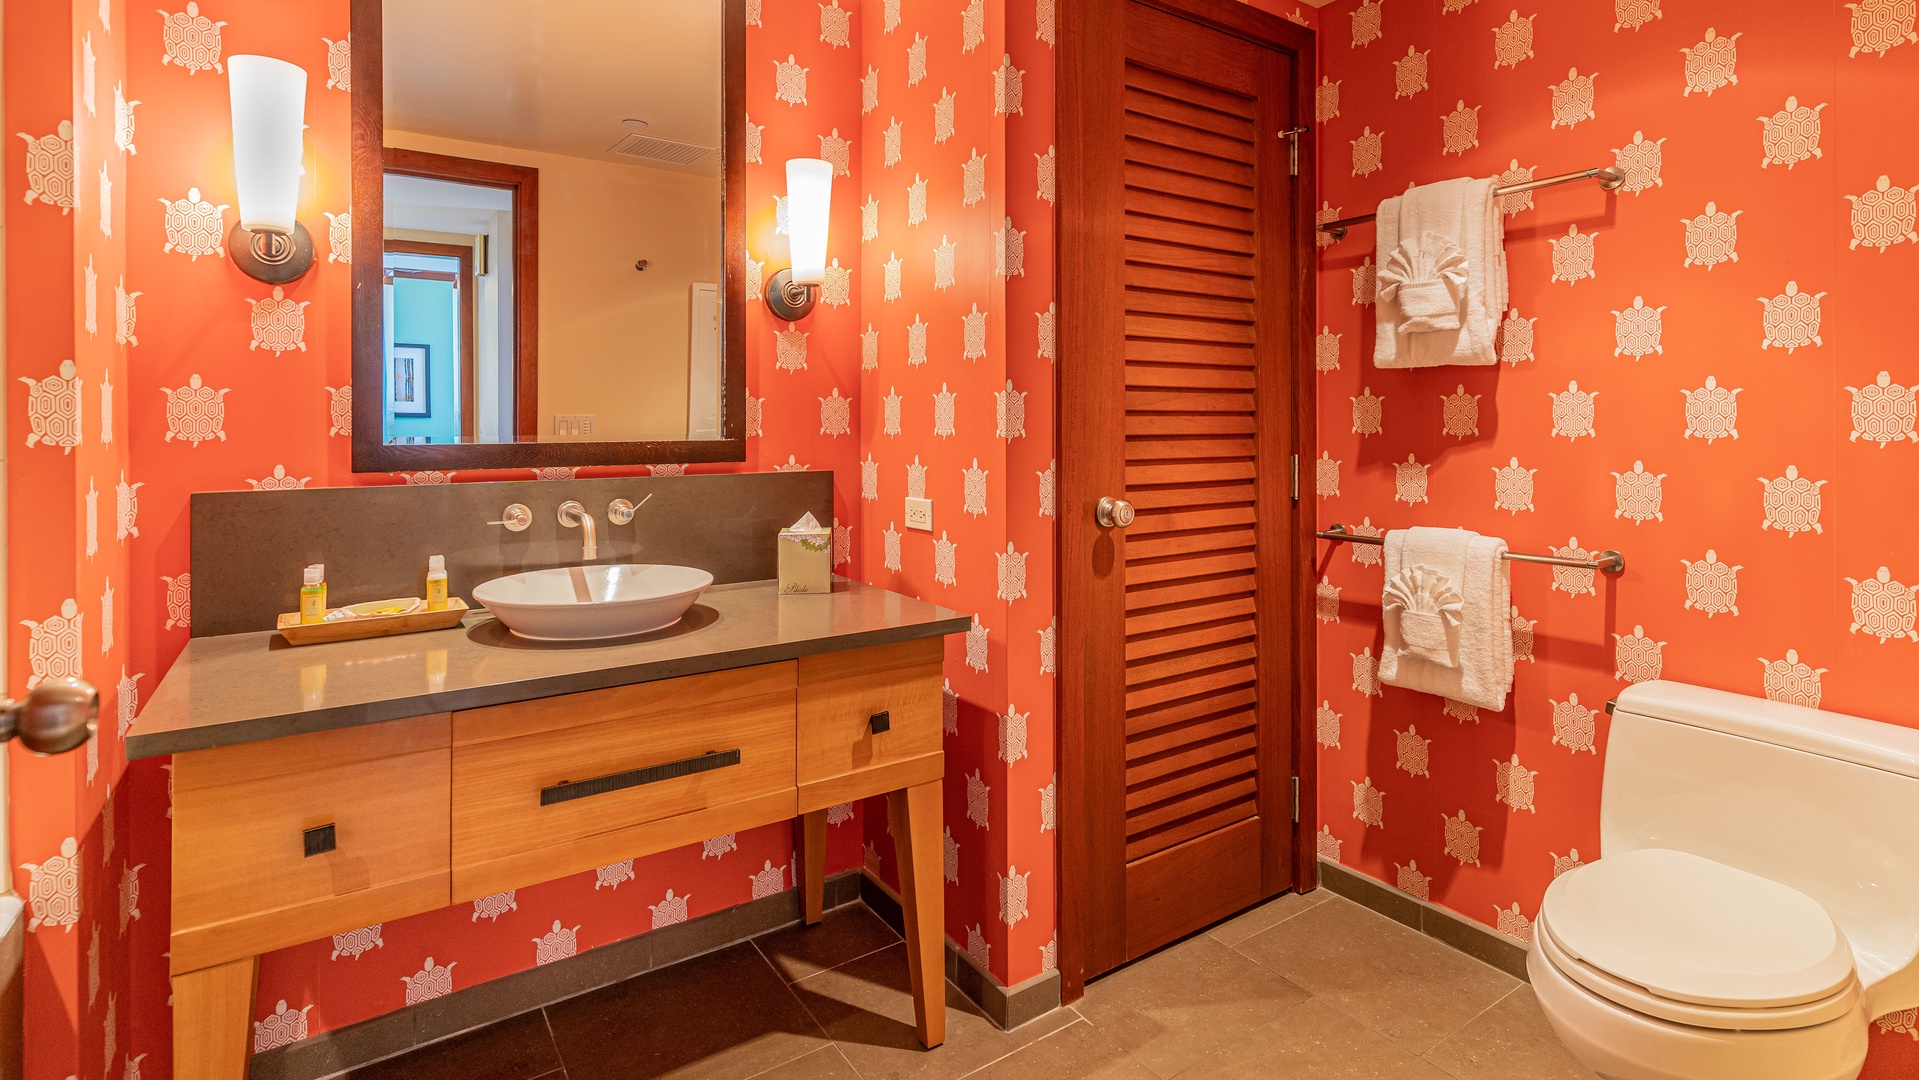 Kapolei Vacation Rentals, Ko Olina Beach Villas B410 - The second guest bathroom is also filled with a vibrant orange accent wall.